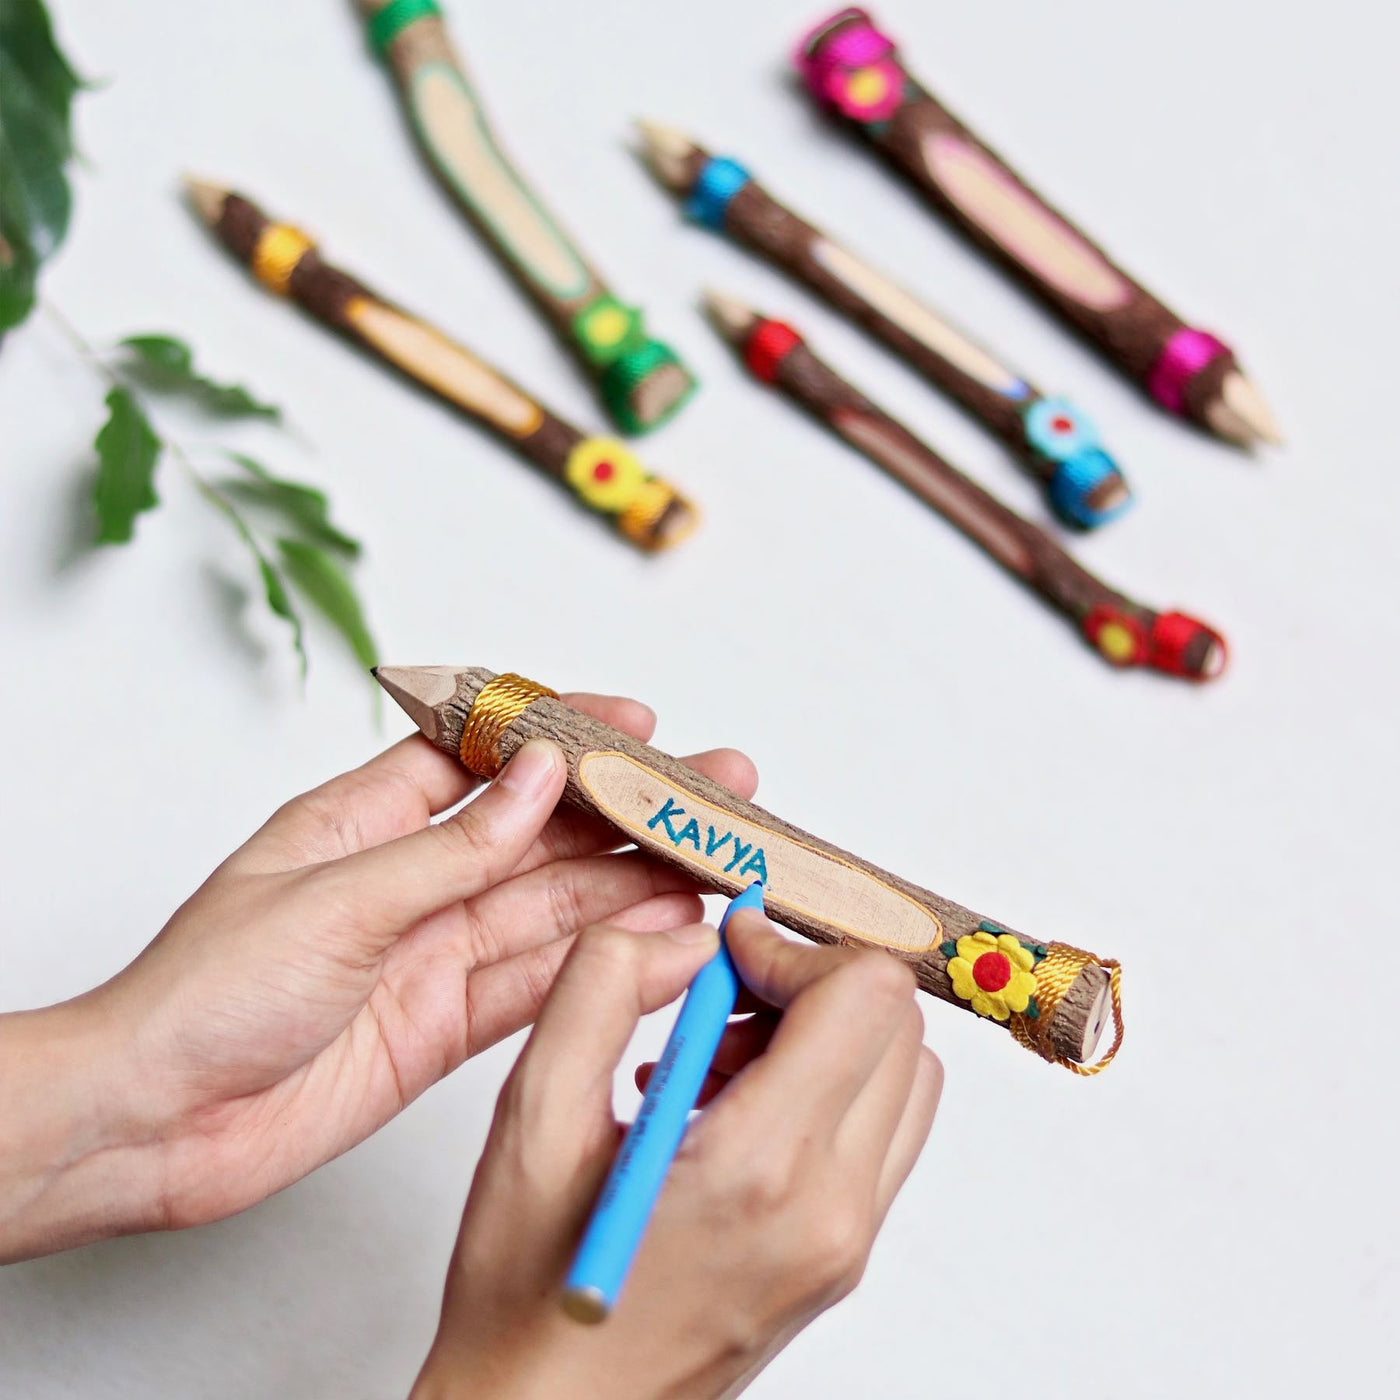 colourful wooden pencils